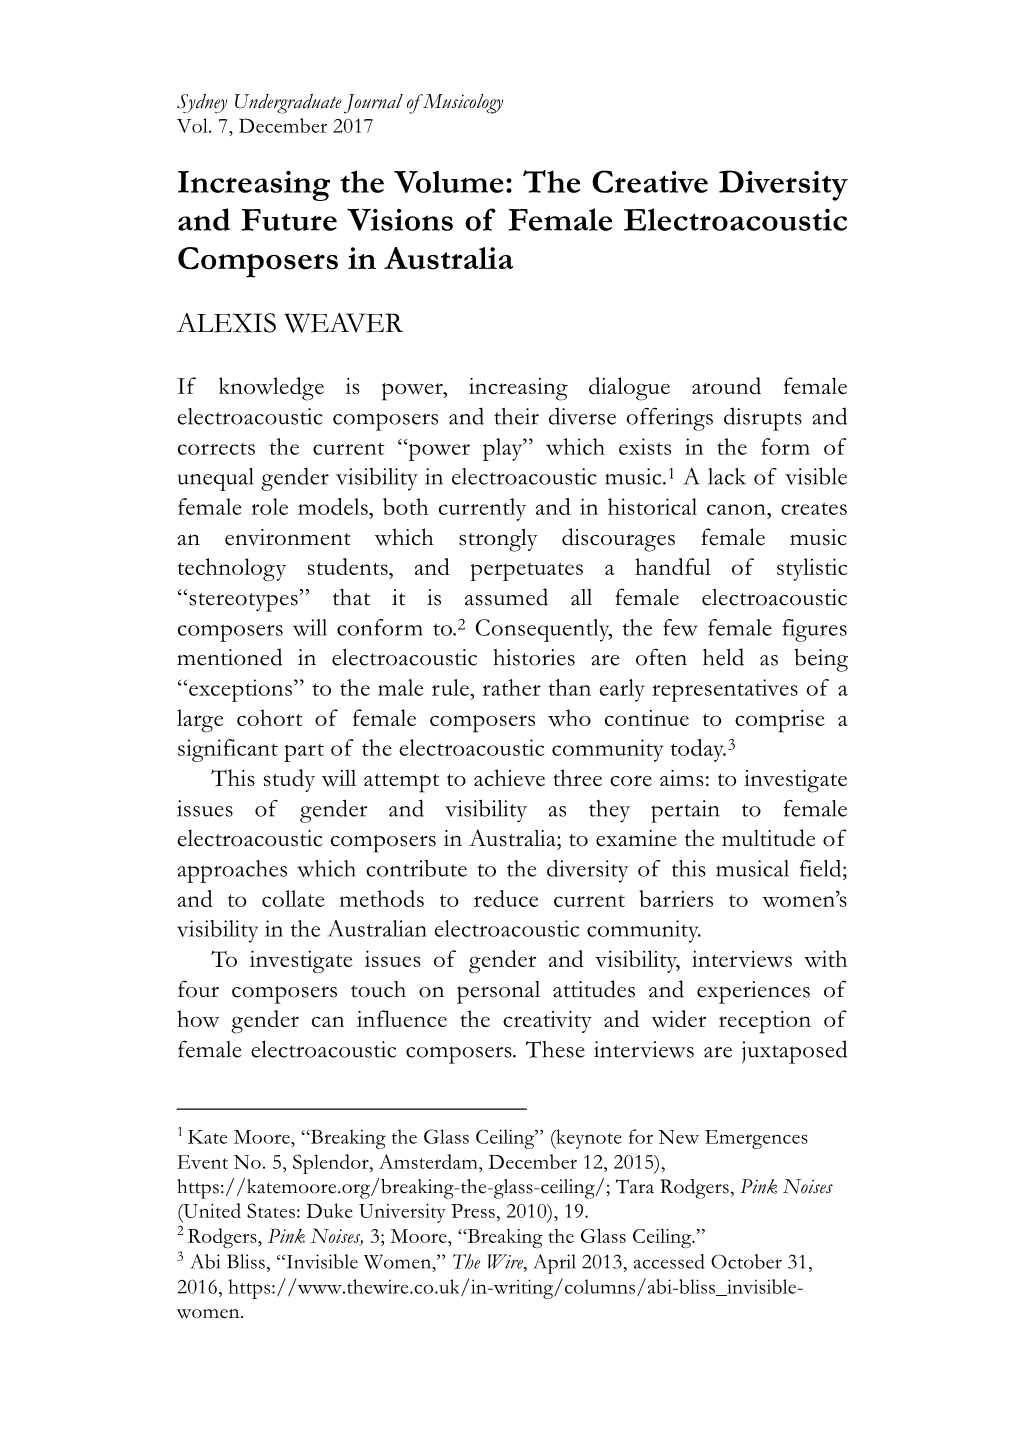 Increasing the Volume: the Creative Diversity and Future Visions of Female Electroacoustic Composers in Australia